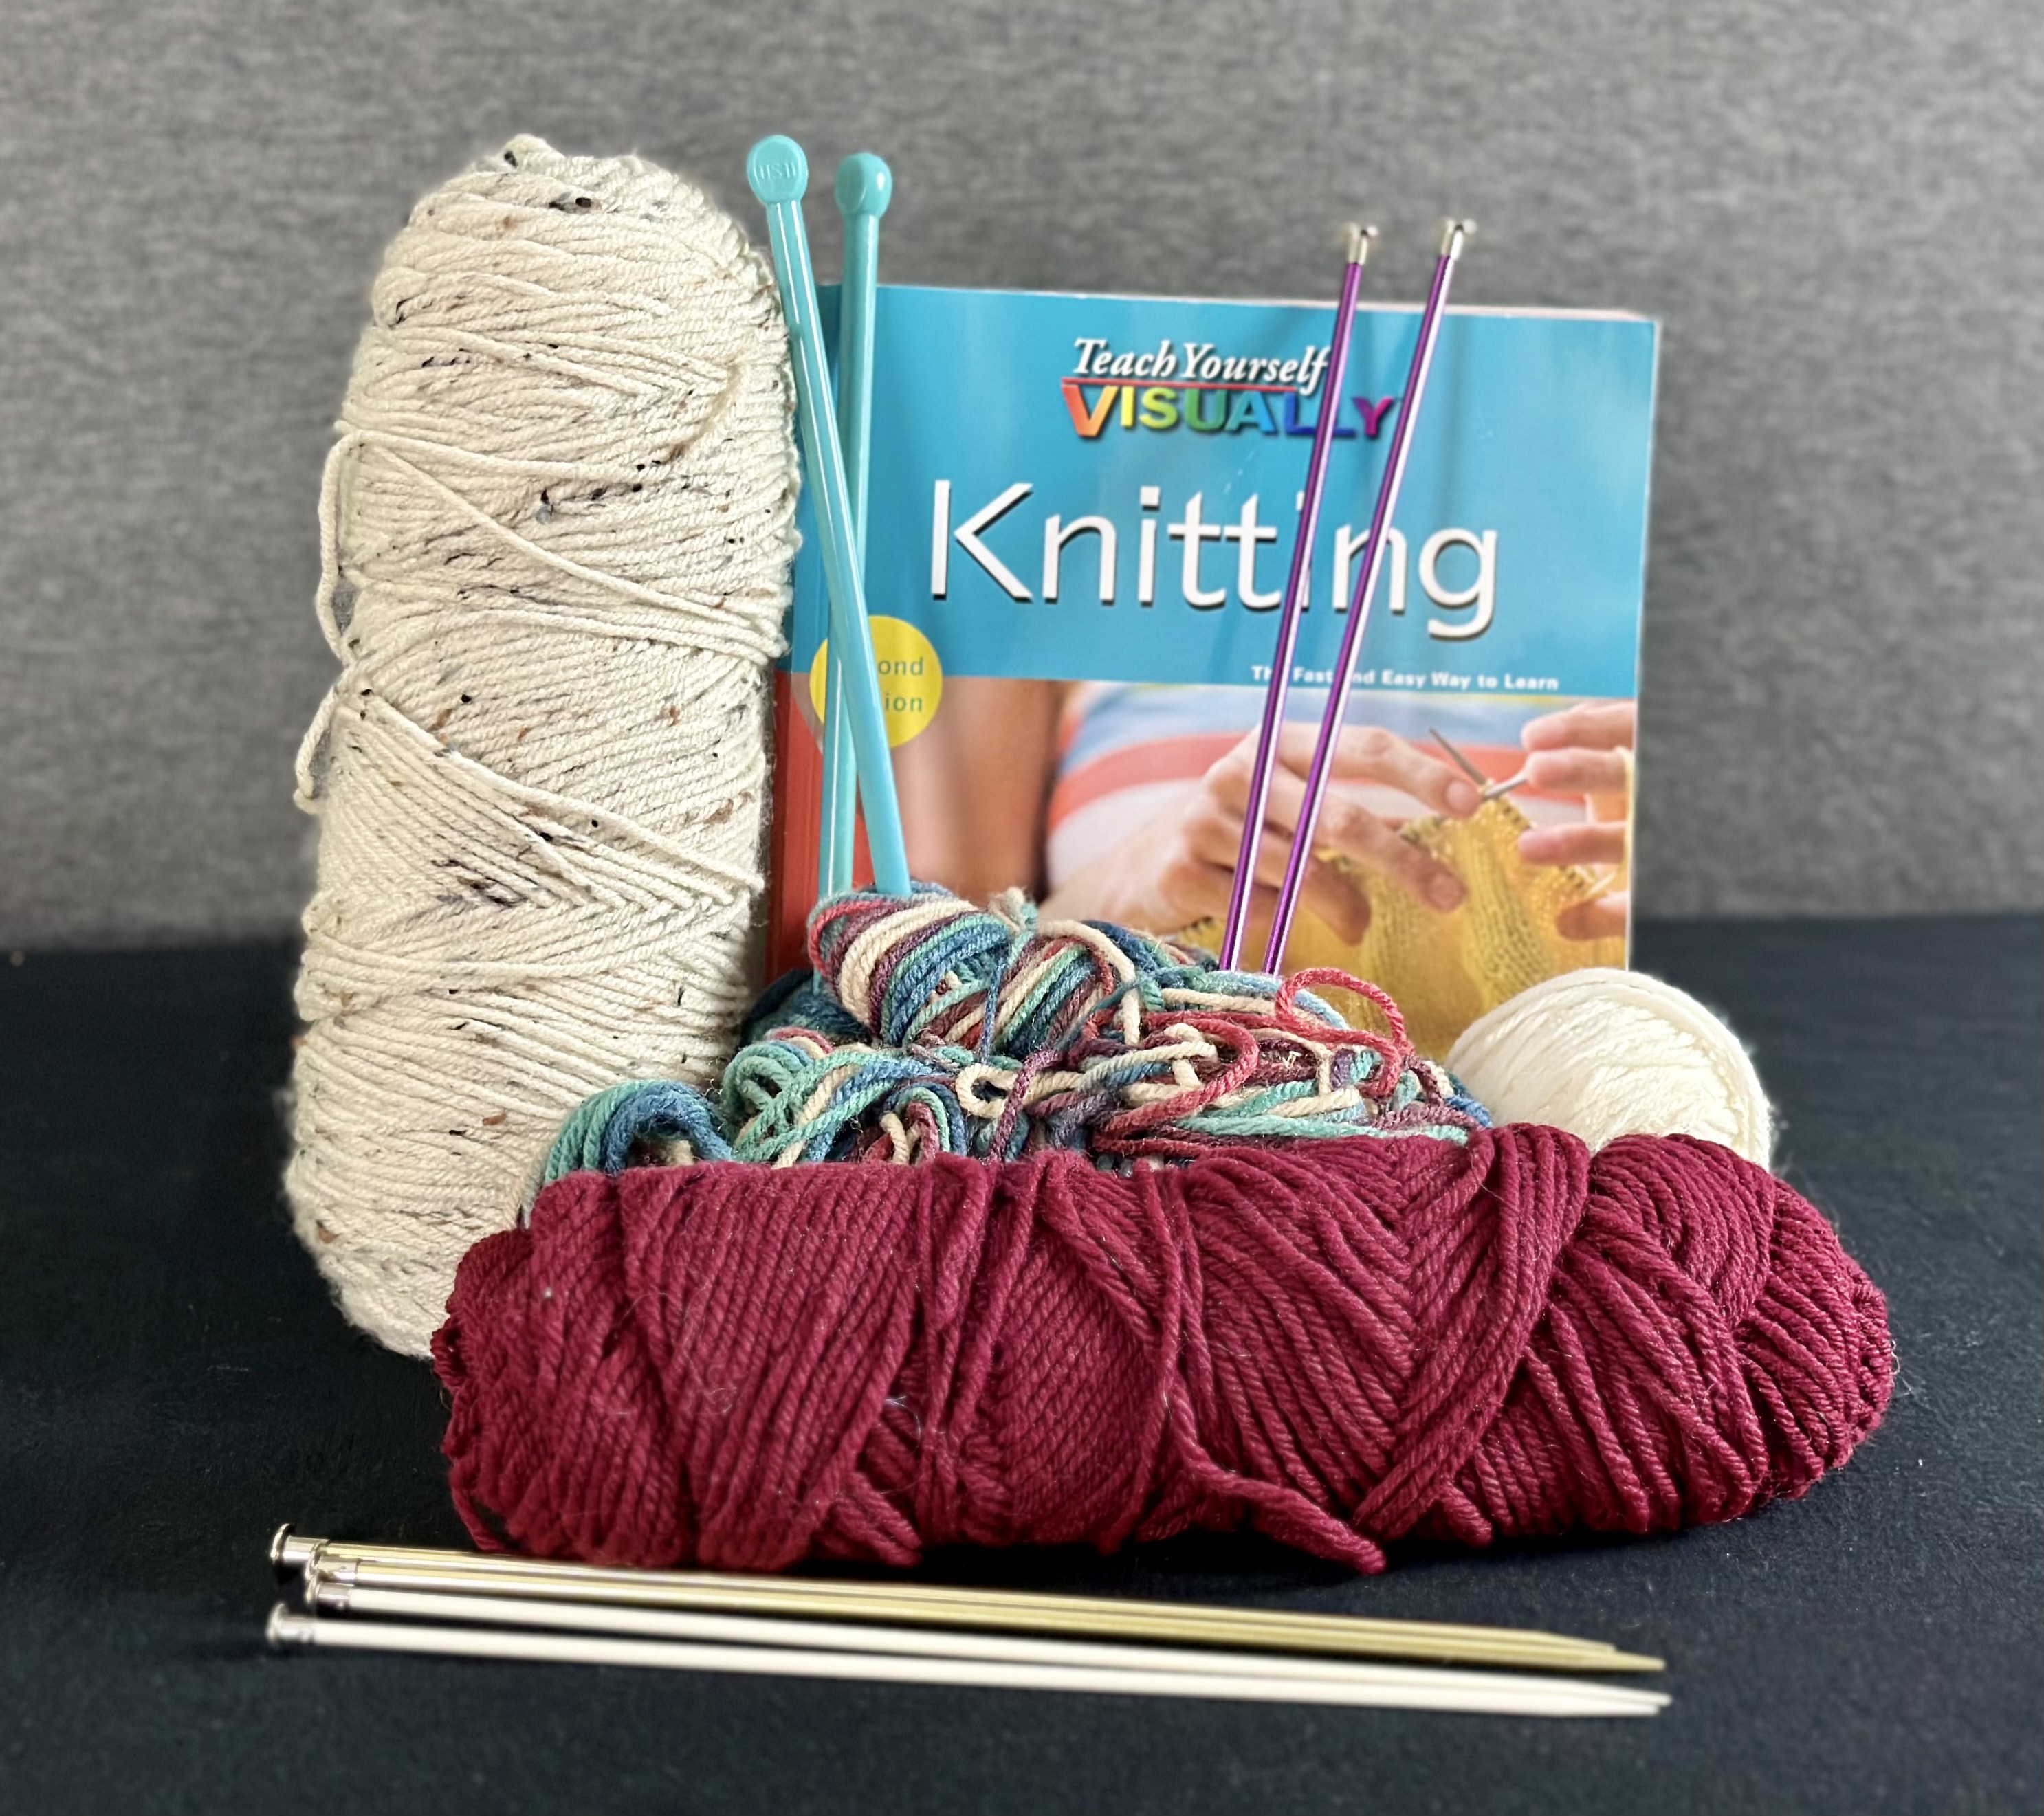 Assorted yarn, needles, and a knitting book